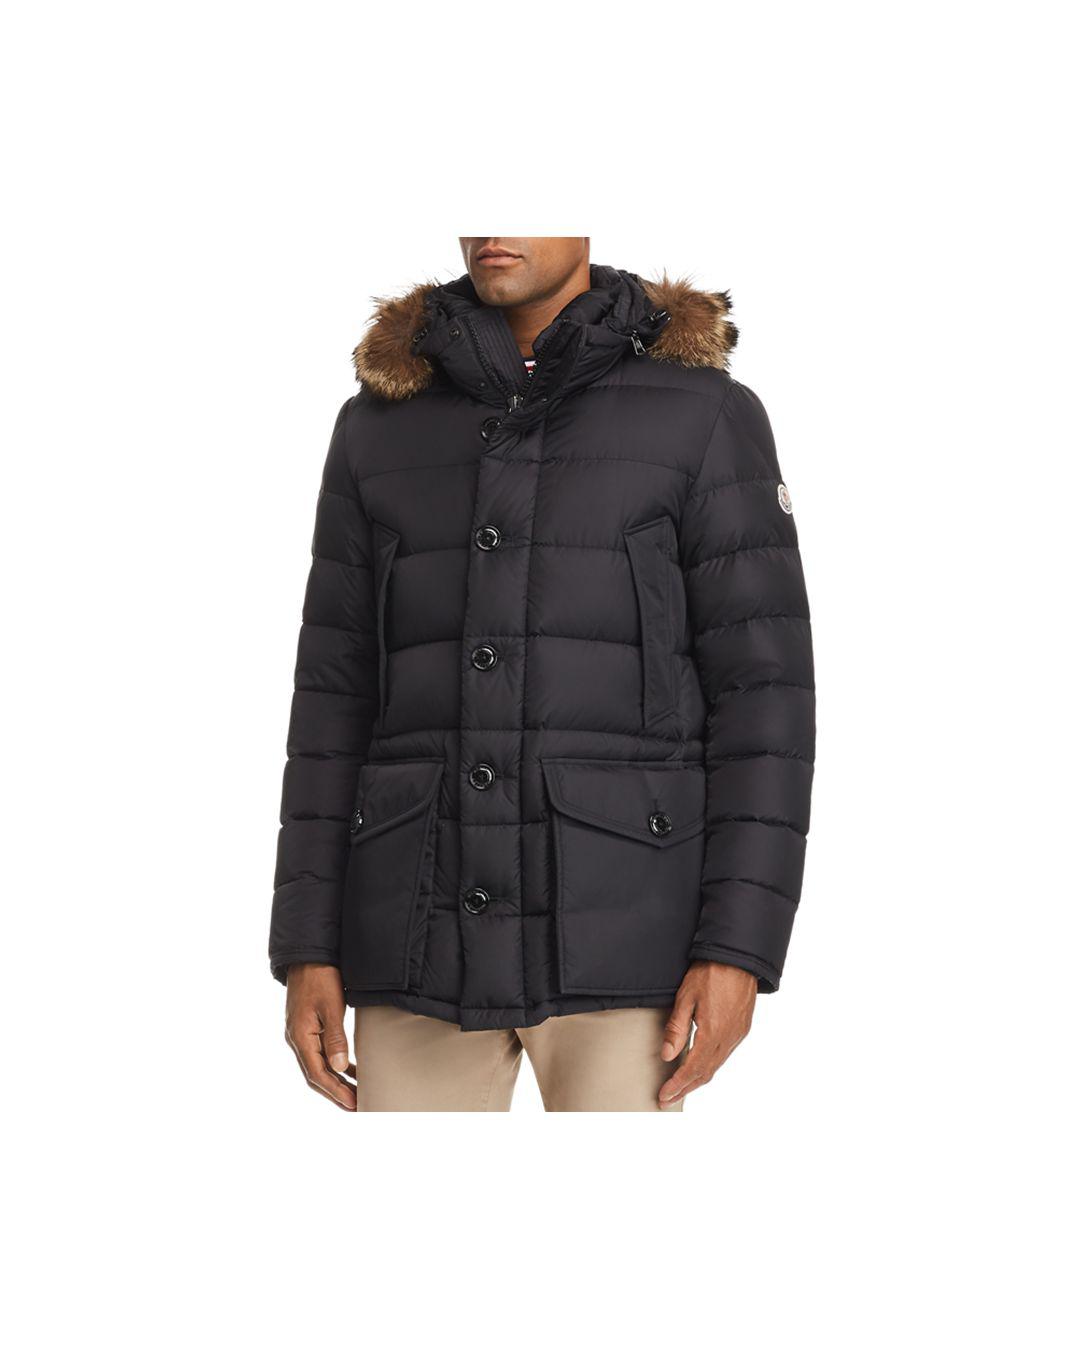 Moncler Cluny Parka Flash Sales, 51% OFF | blountindustry.com